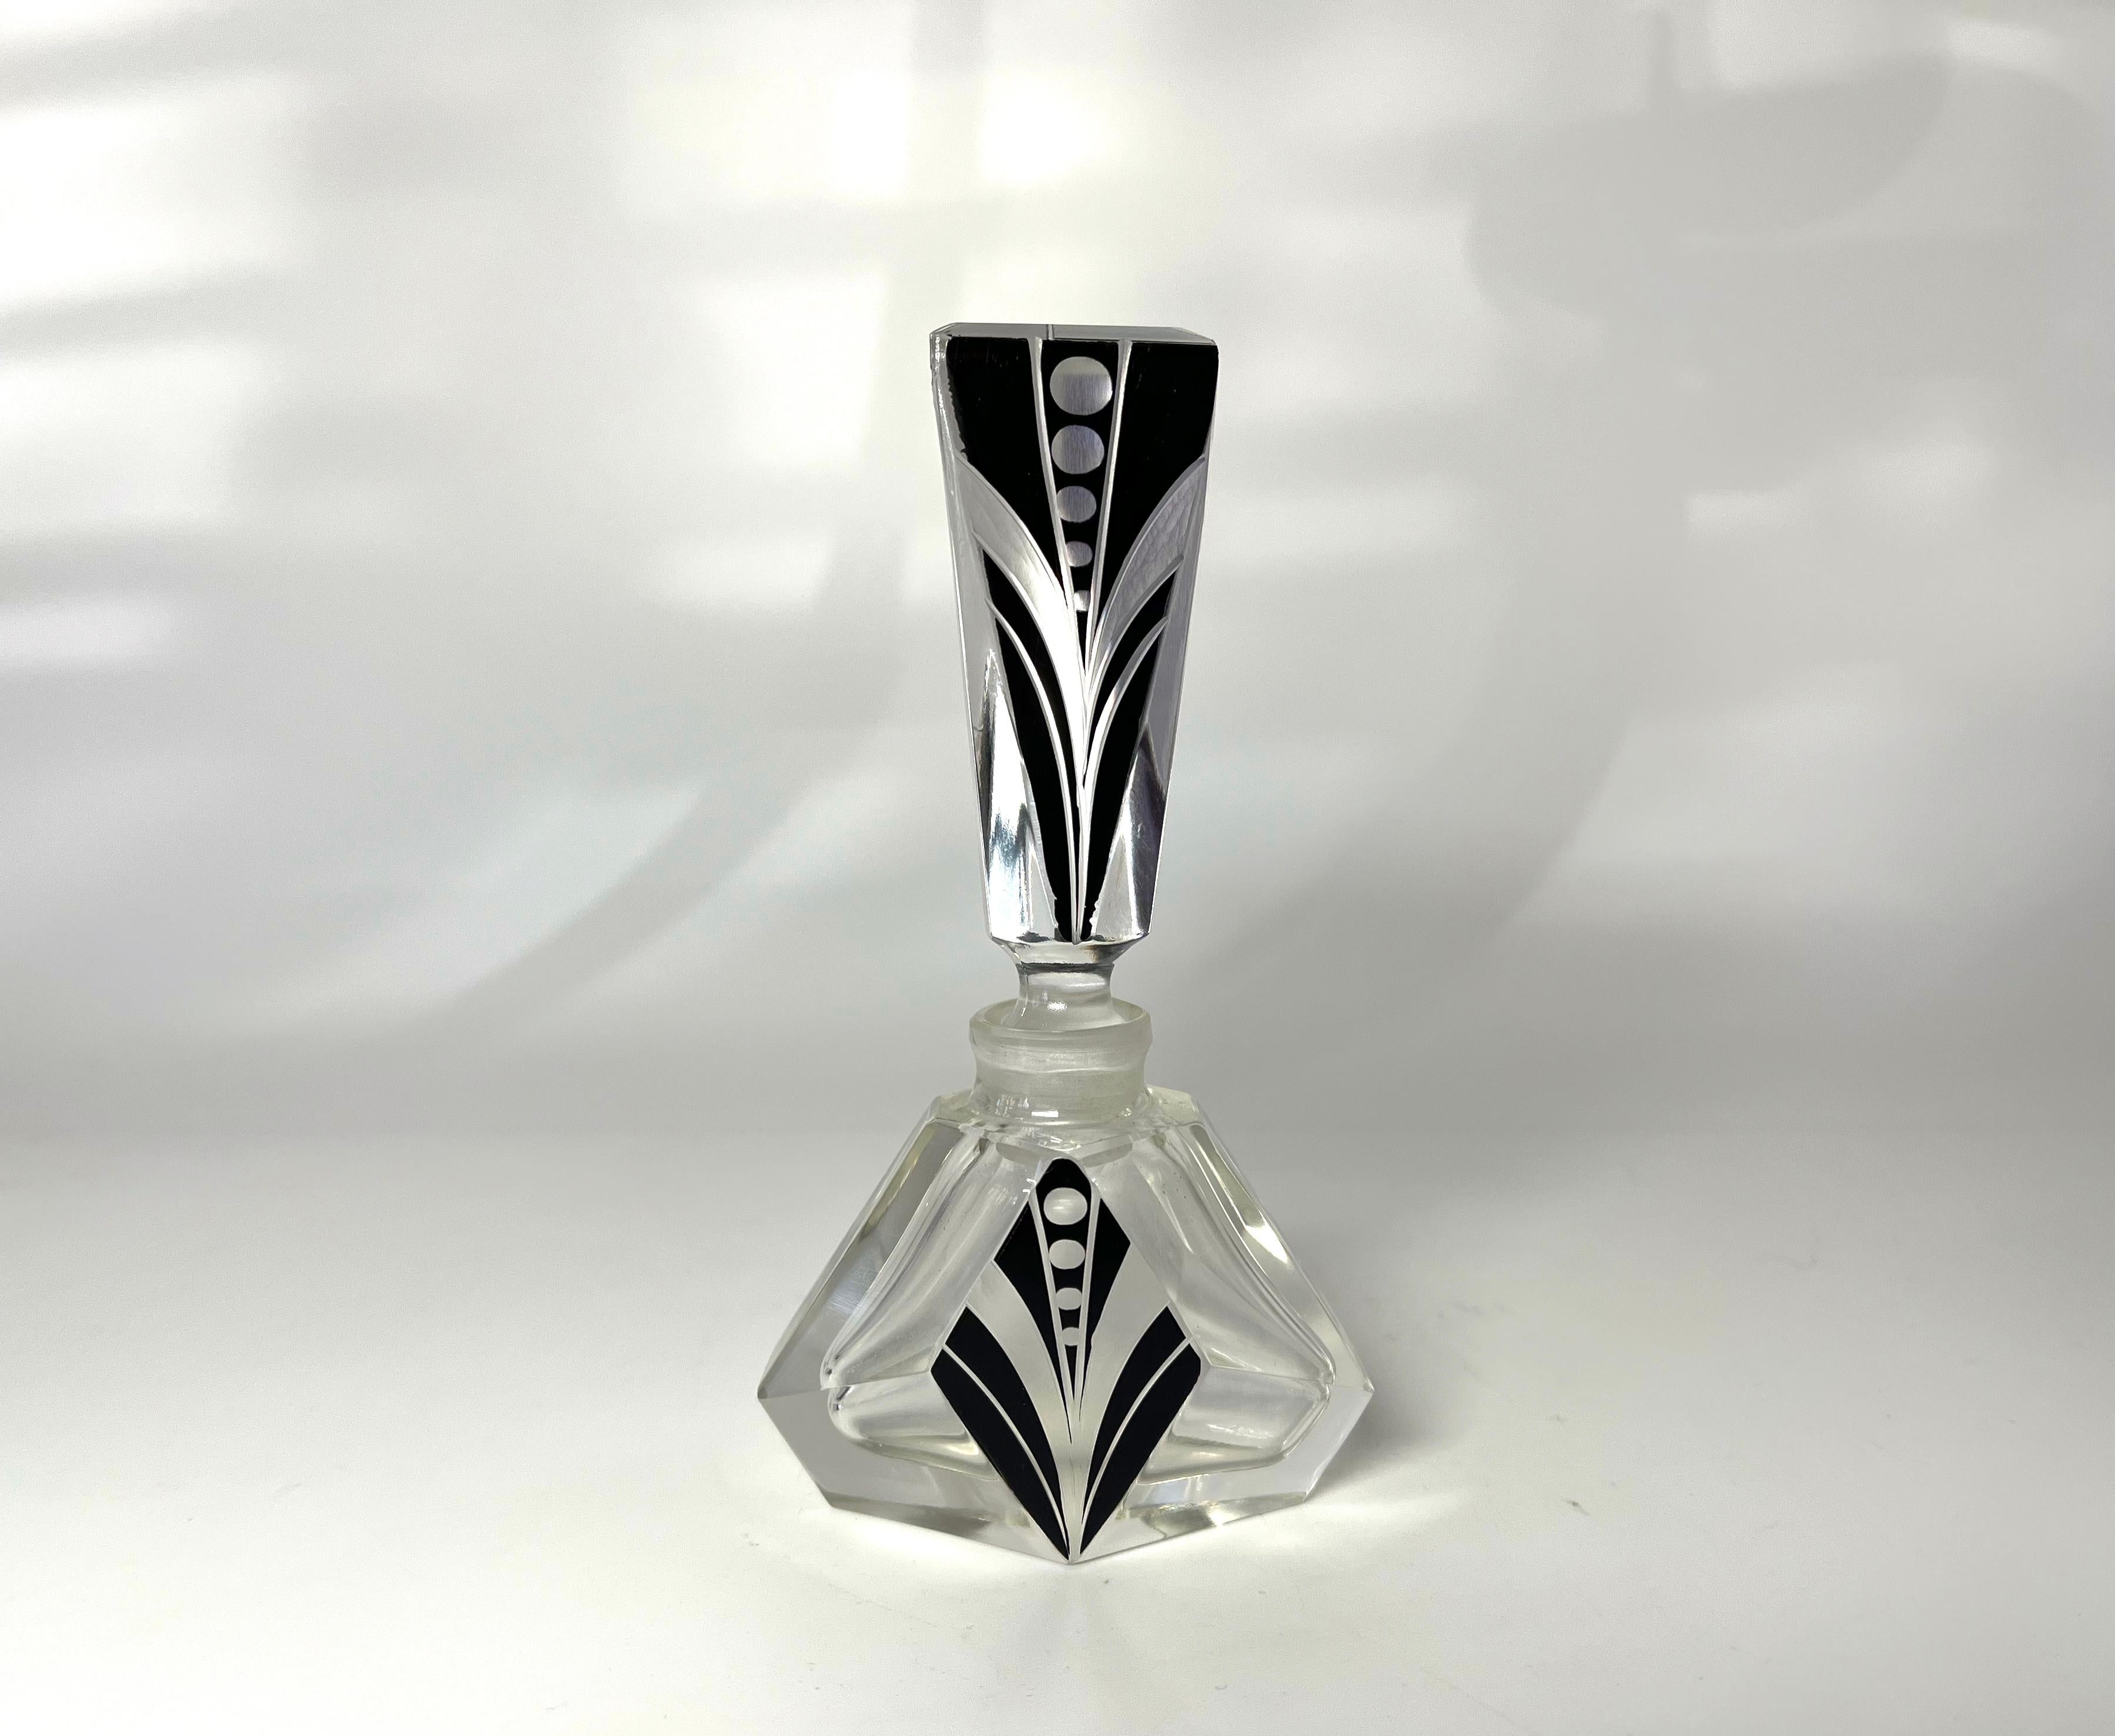 Recognisably first class, beautiful Czech crystal Art Deco perfume bottle
Clean geometric pattern on black enamel. 
Vintage Bohemian, Czech crystal 
Circa 1930's
Height 4.75 inch, Width 2.5 inch, Depth 1.5 inch 
Exceptionally good condition.